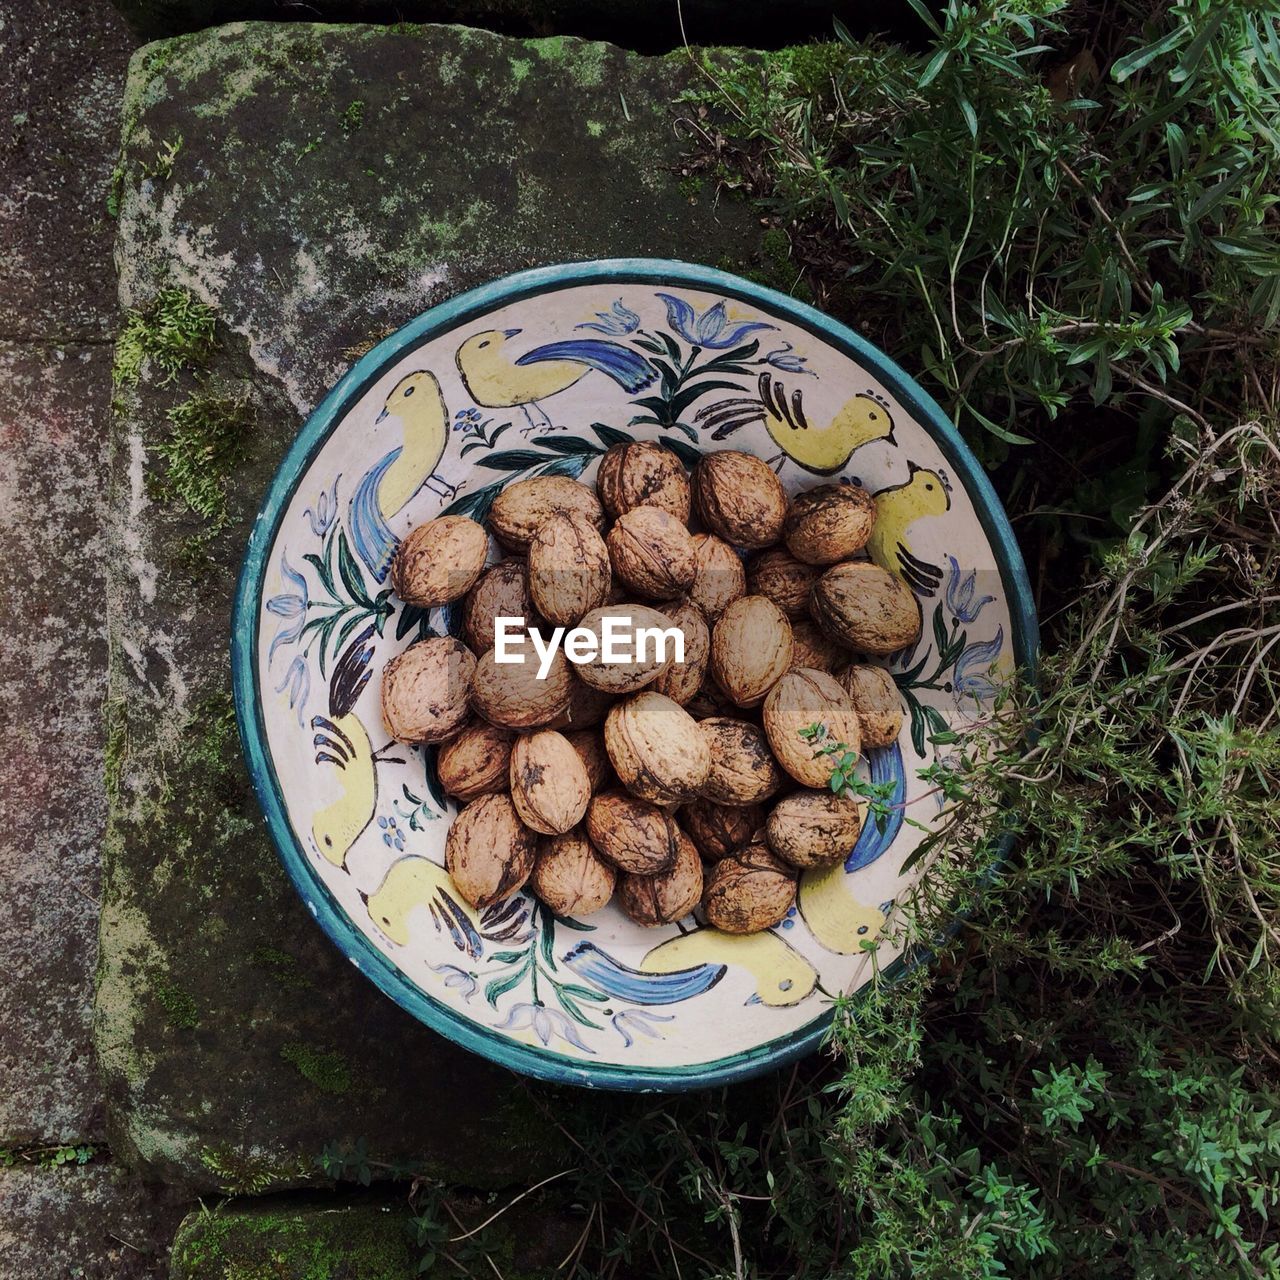 Directly above shot of walnuts in plate on ground